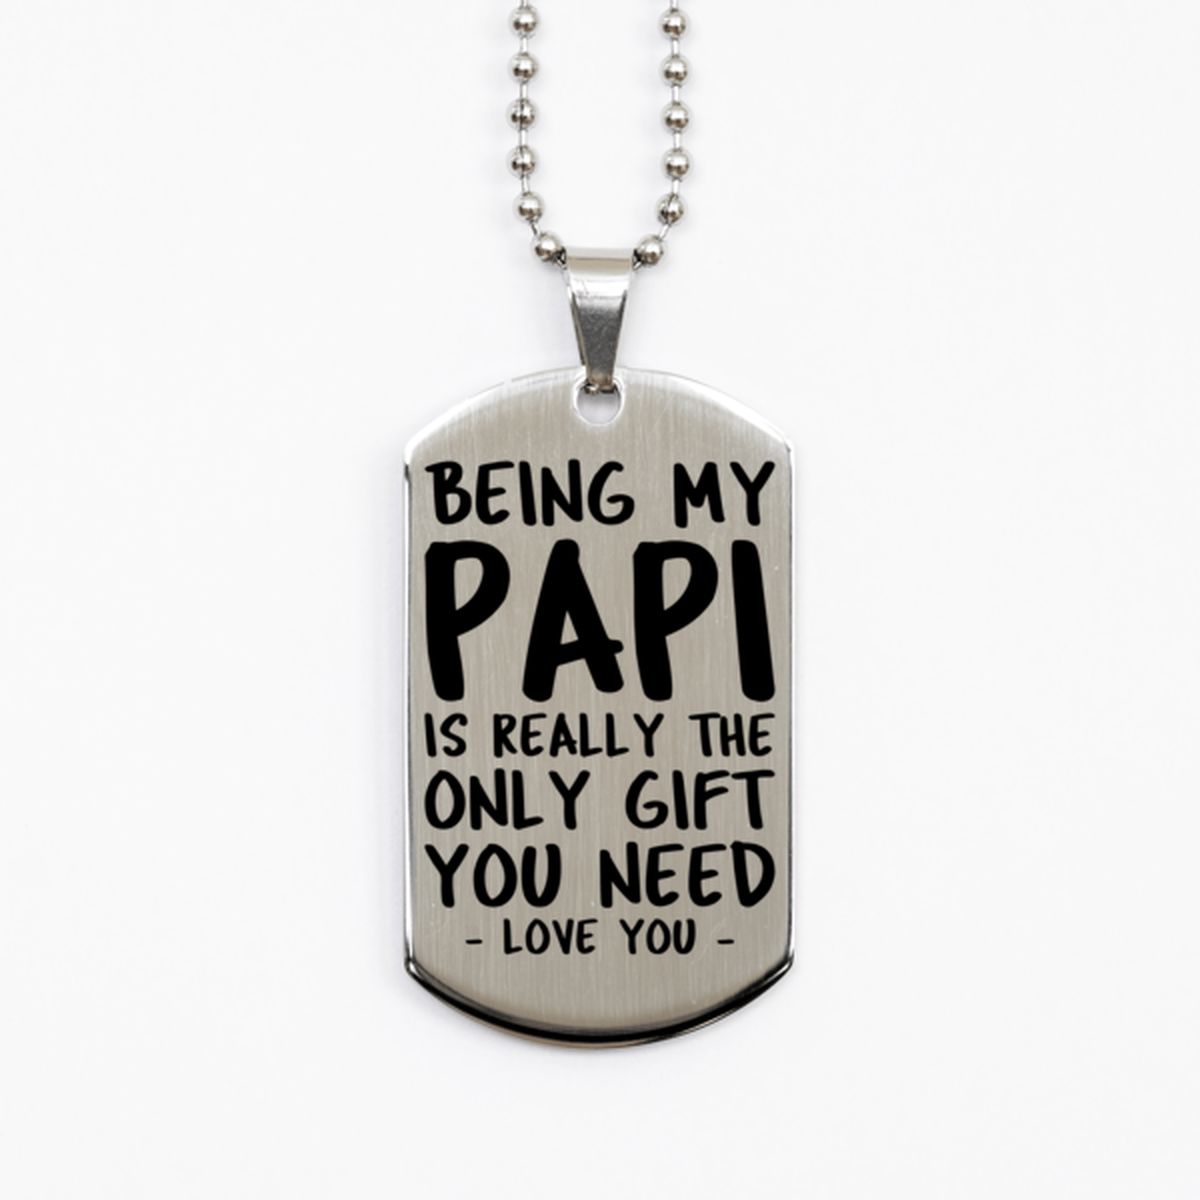 Funny Papi Silver Dog Tag Necklace, Being My Papi Is Really the Only Gift You Need, Best Birthday Gifts for Papi